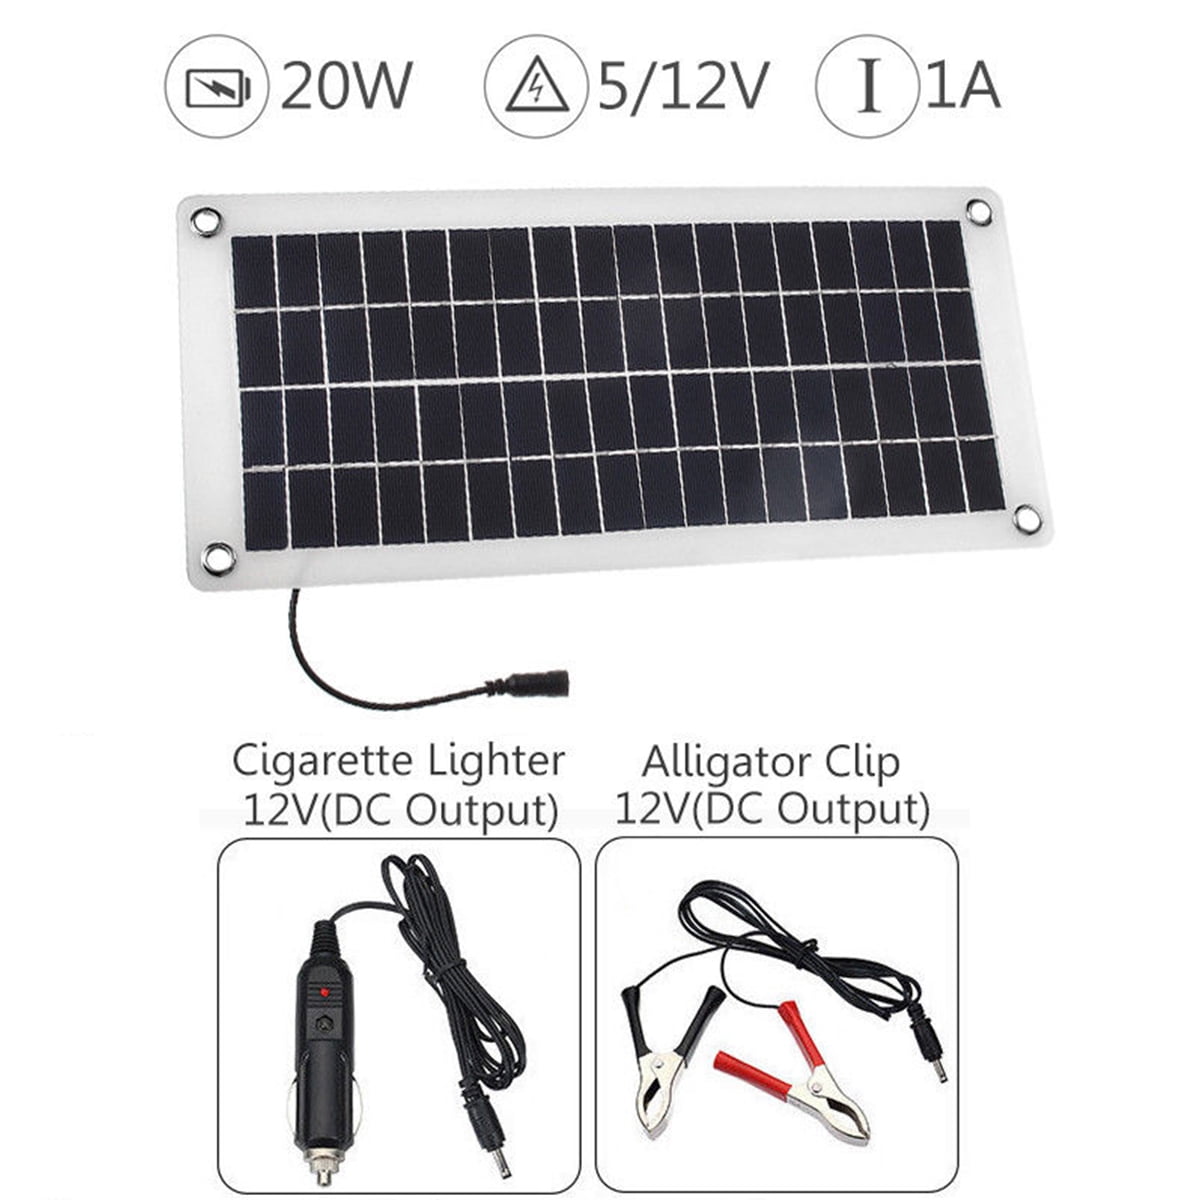 Details about   20W 12V Outdoor Car Boat Yacht Solar Panel Trickle Battery Charger Power Supply 